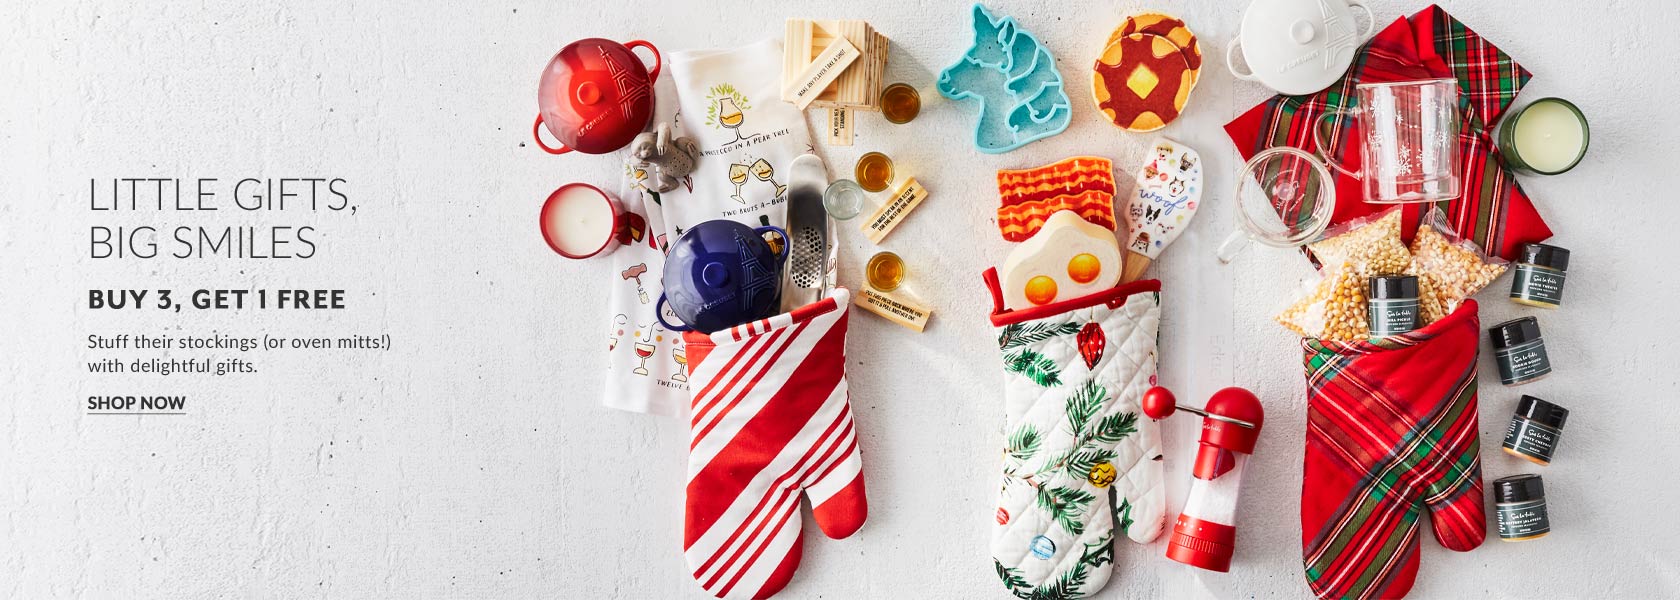 Little Gifts, Big Smiles buy 3, get 1 free. Stuff their stockings (or oven mitts!) with delightful gifts Galore holiday gifting at Sur La Table. Shop Now.